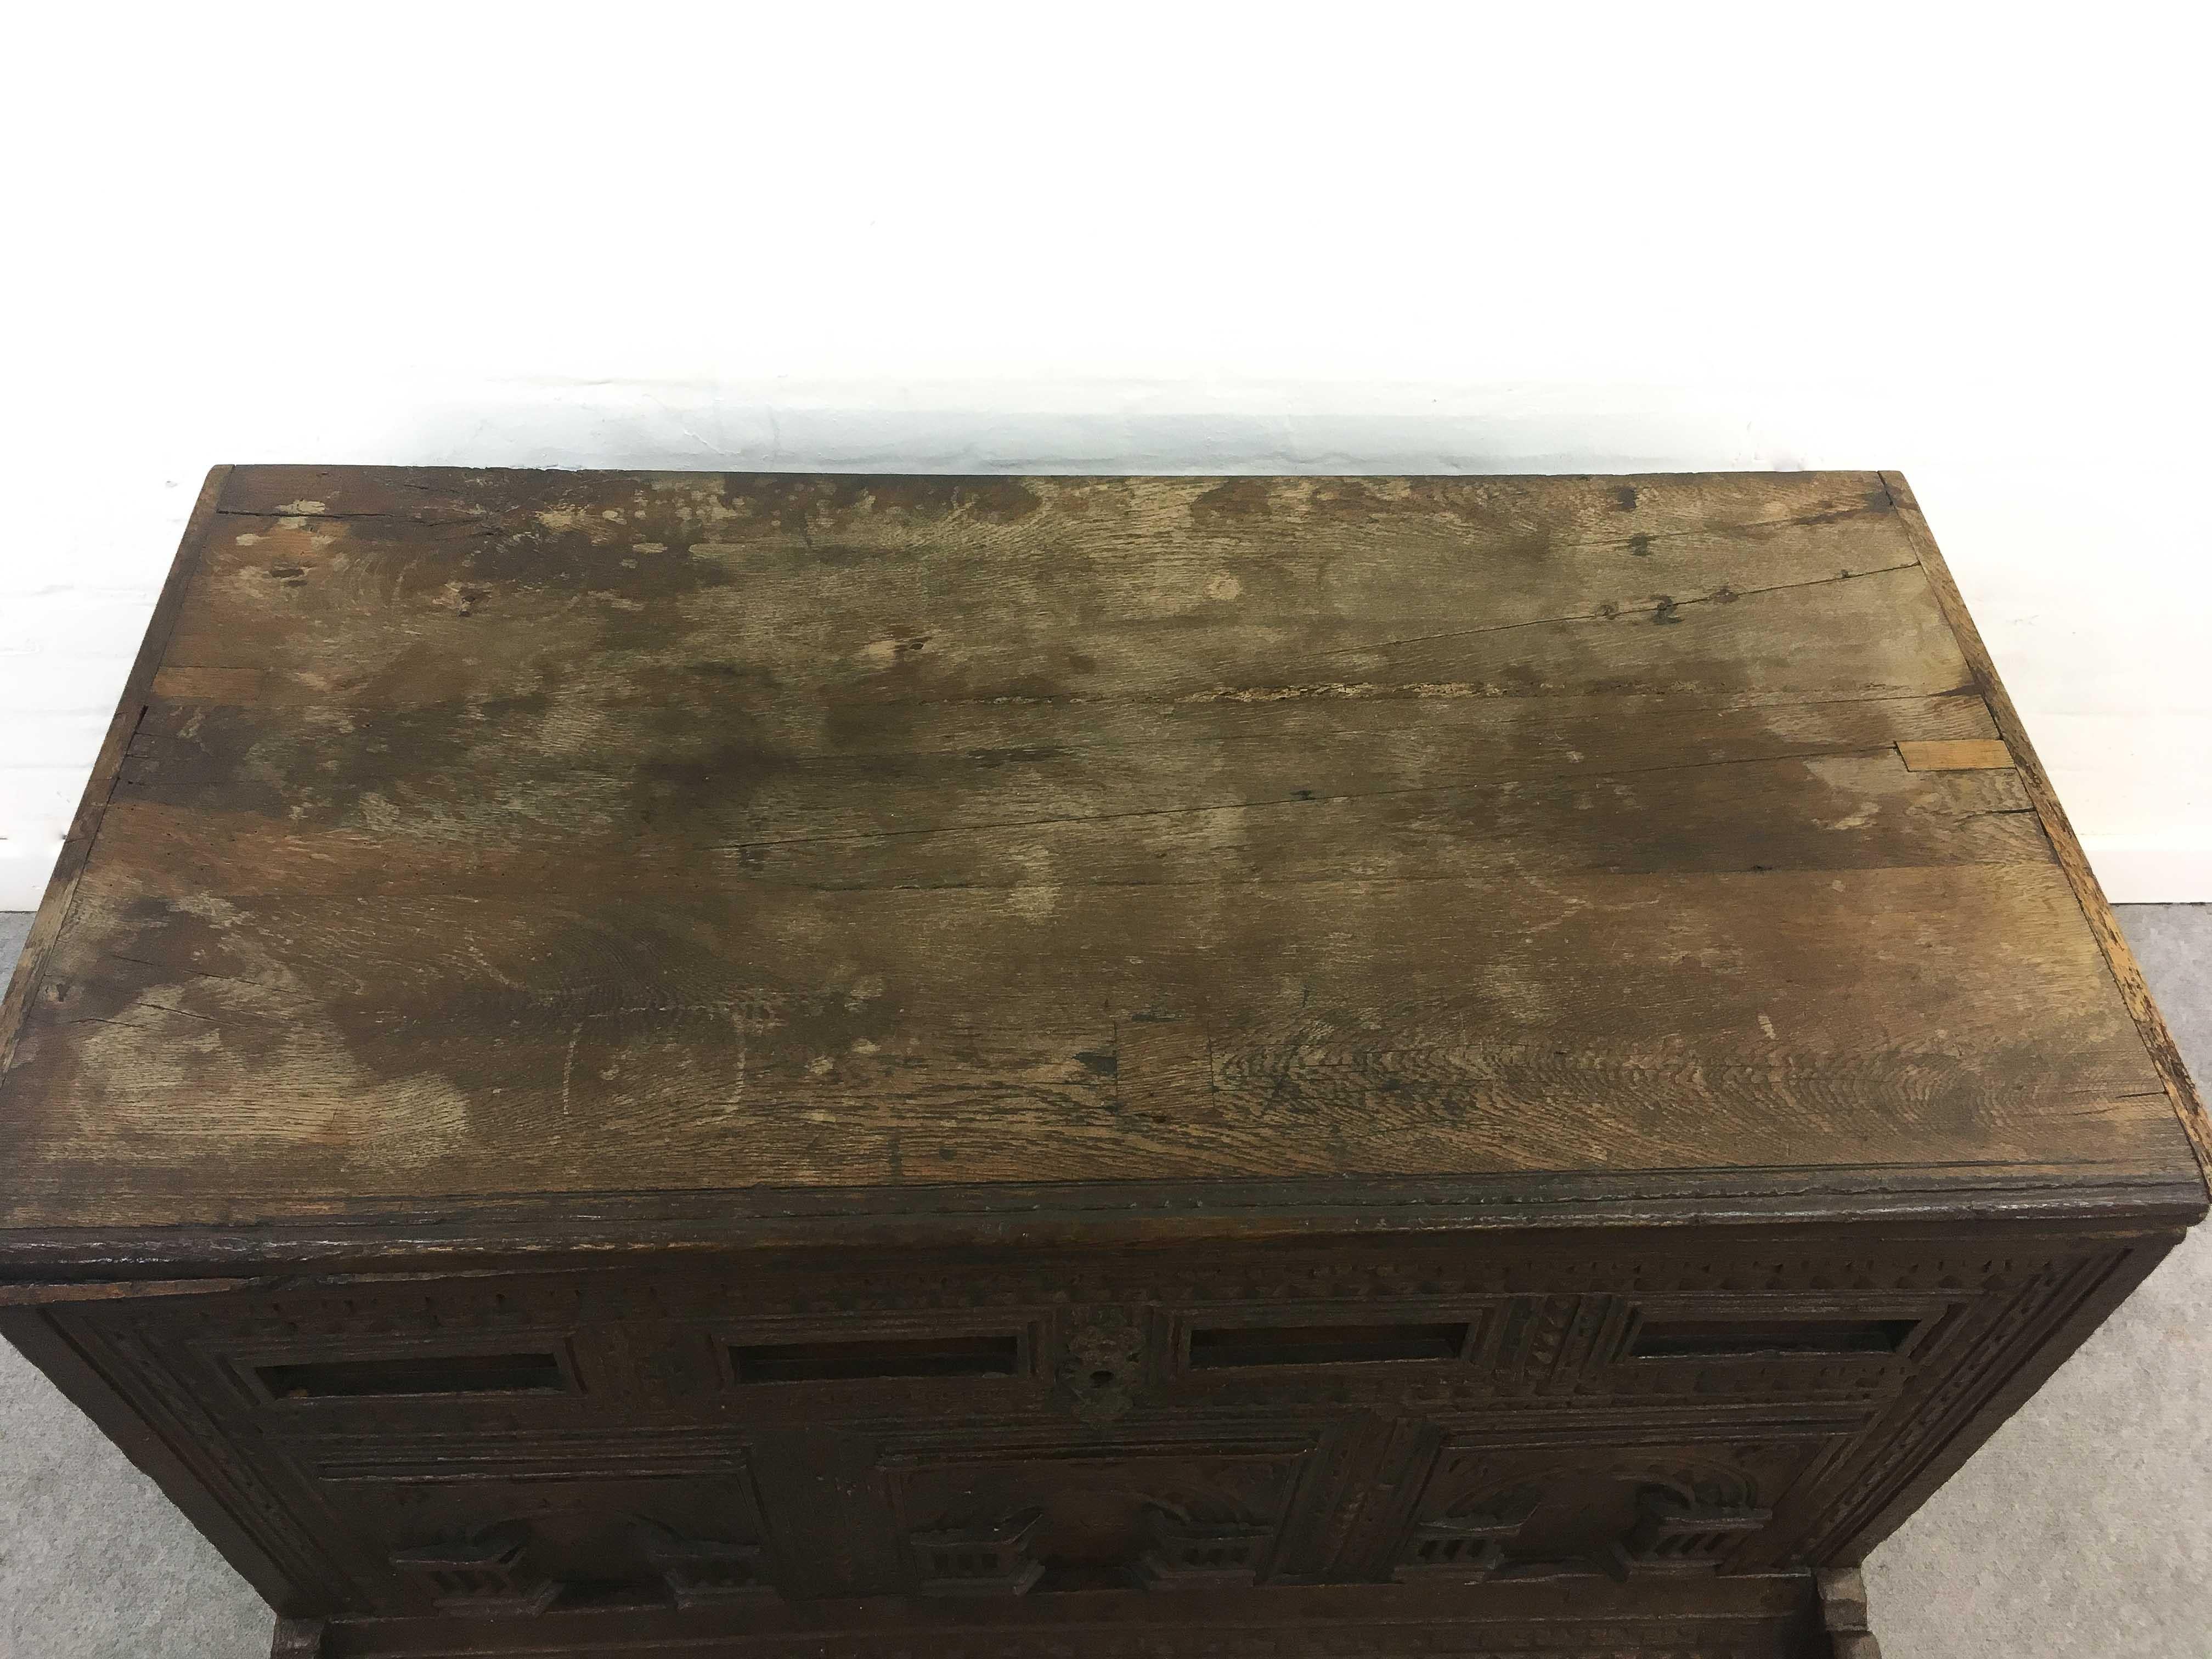 18th Century German Hope Chest or Dowry Chest, Carved Oak, Dated 1718, Baroque